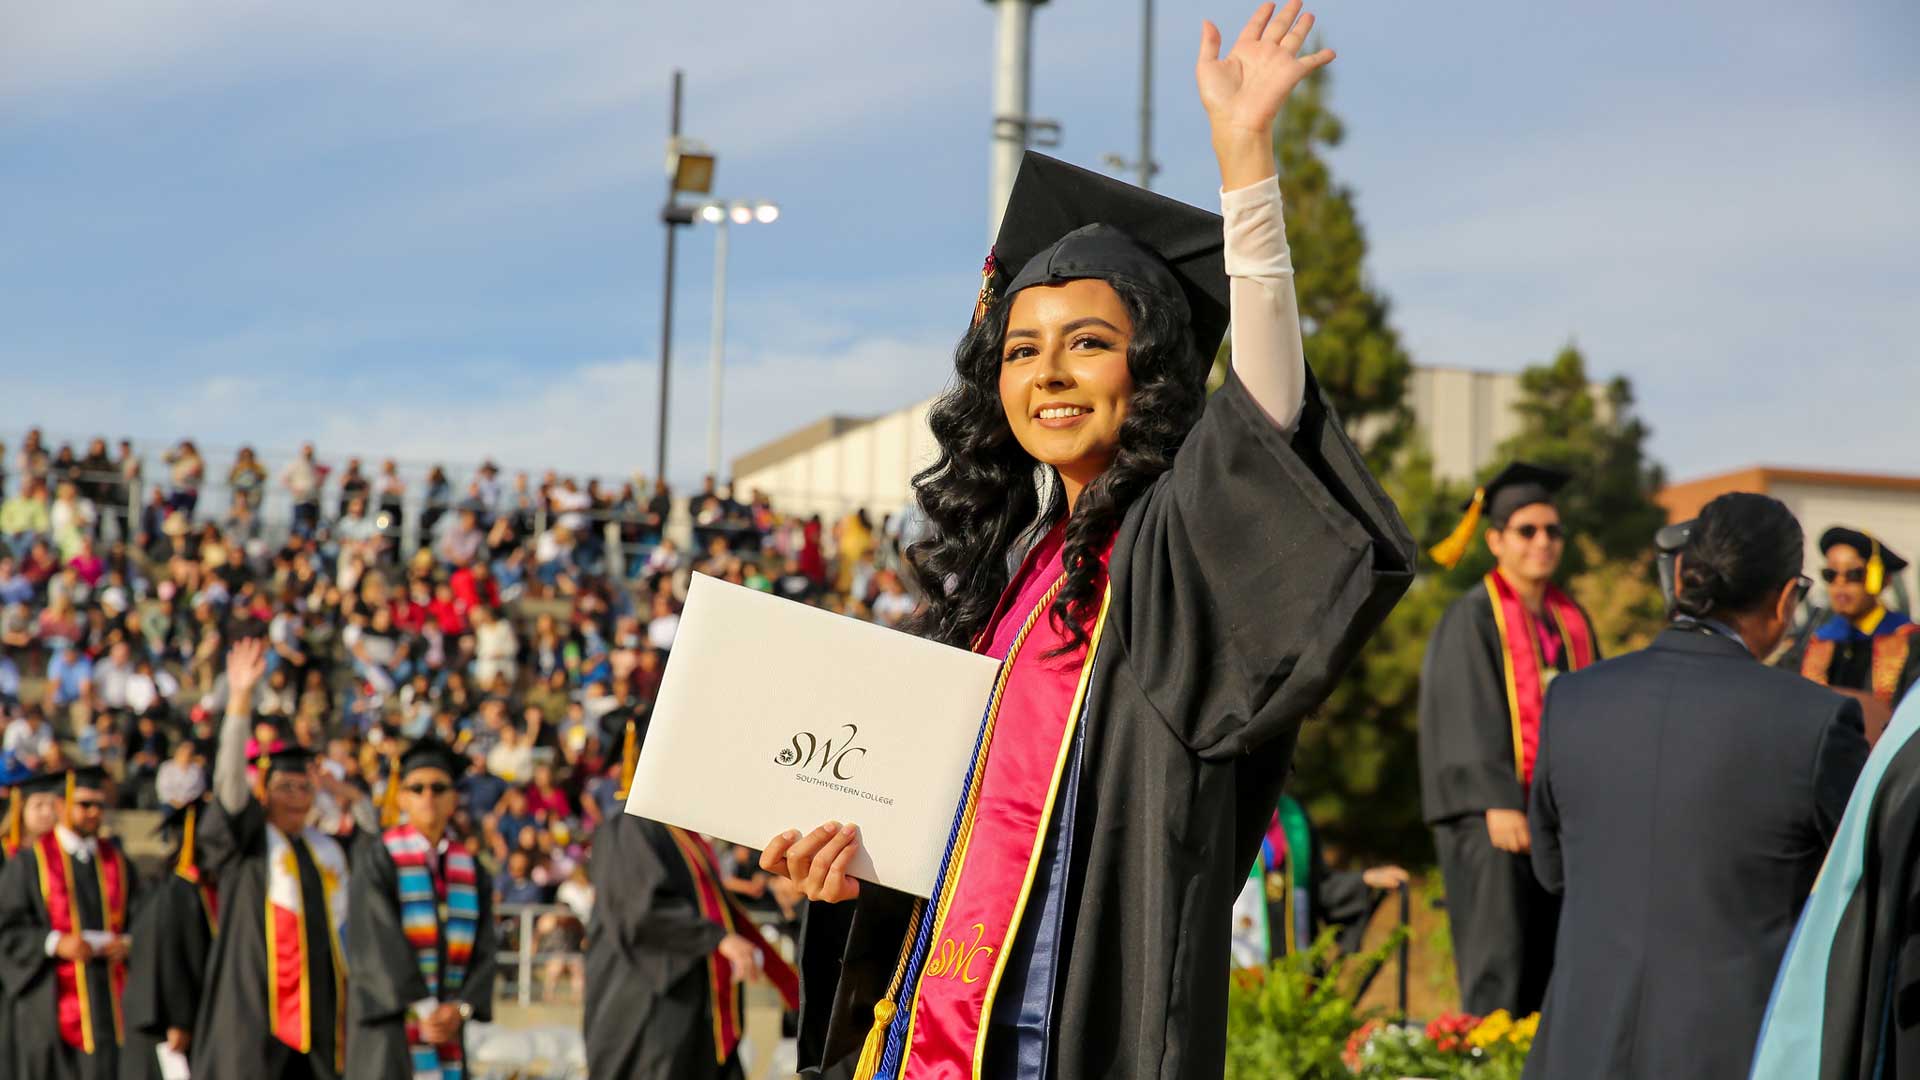 Southwestern College student at graduation holding diploma and waving